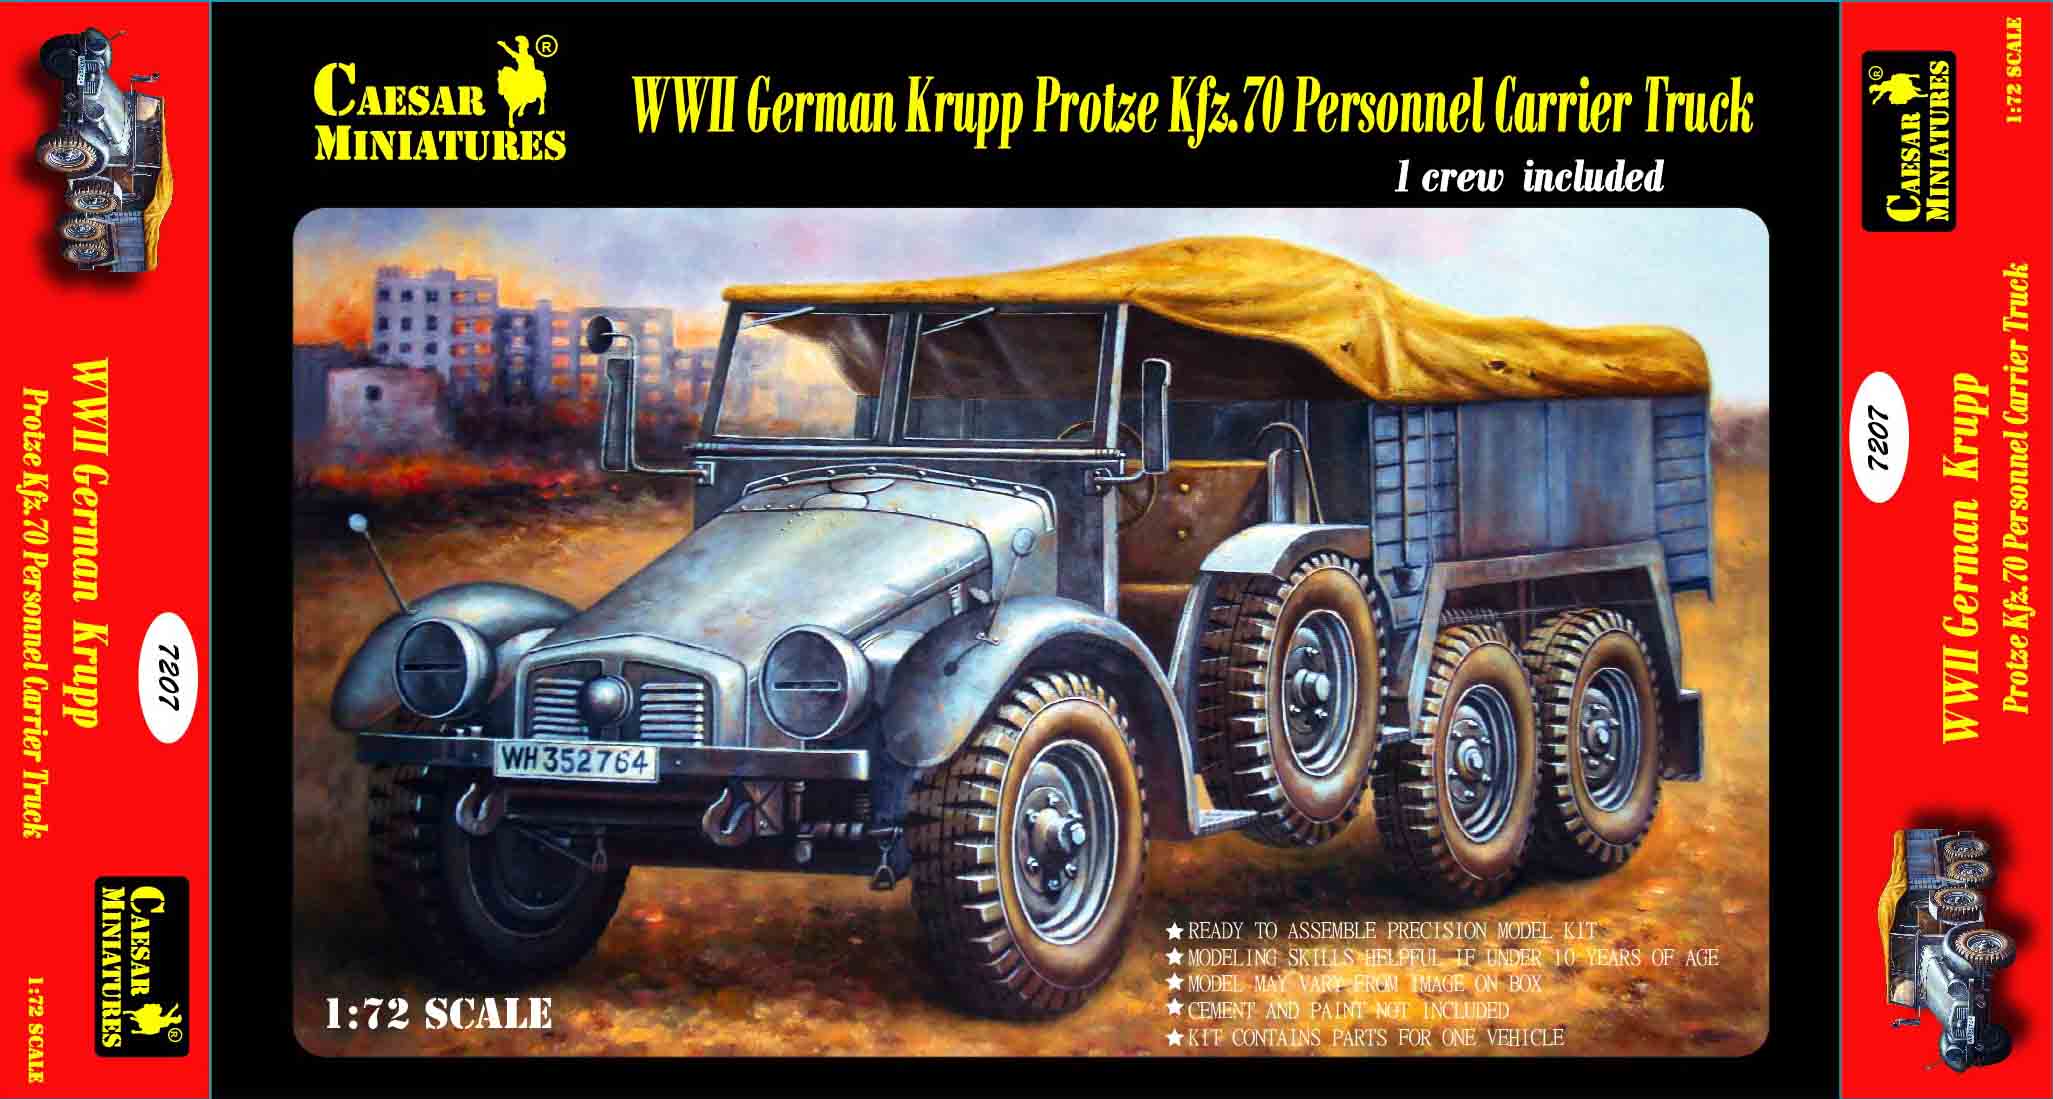 Military Series: WWII German Krupp Protze Personnel Carrier Truck